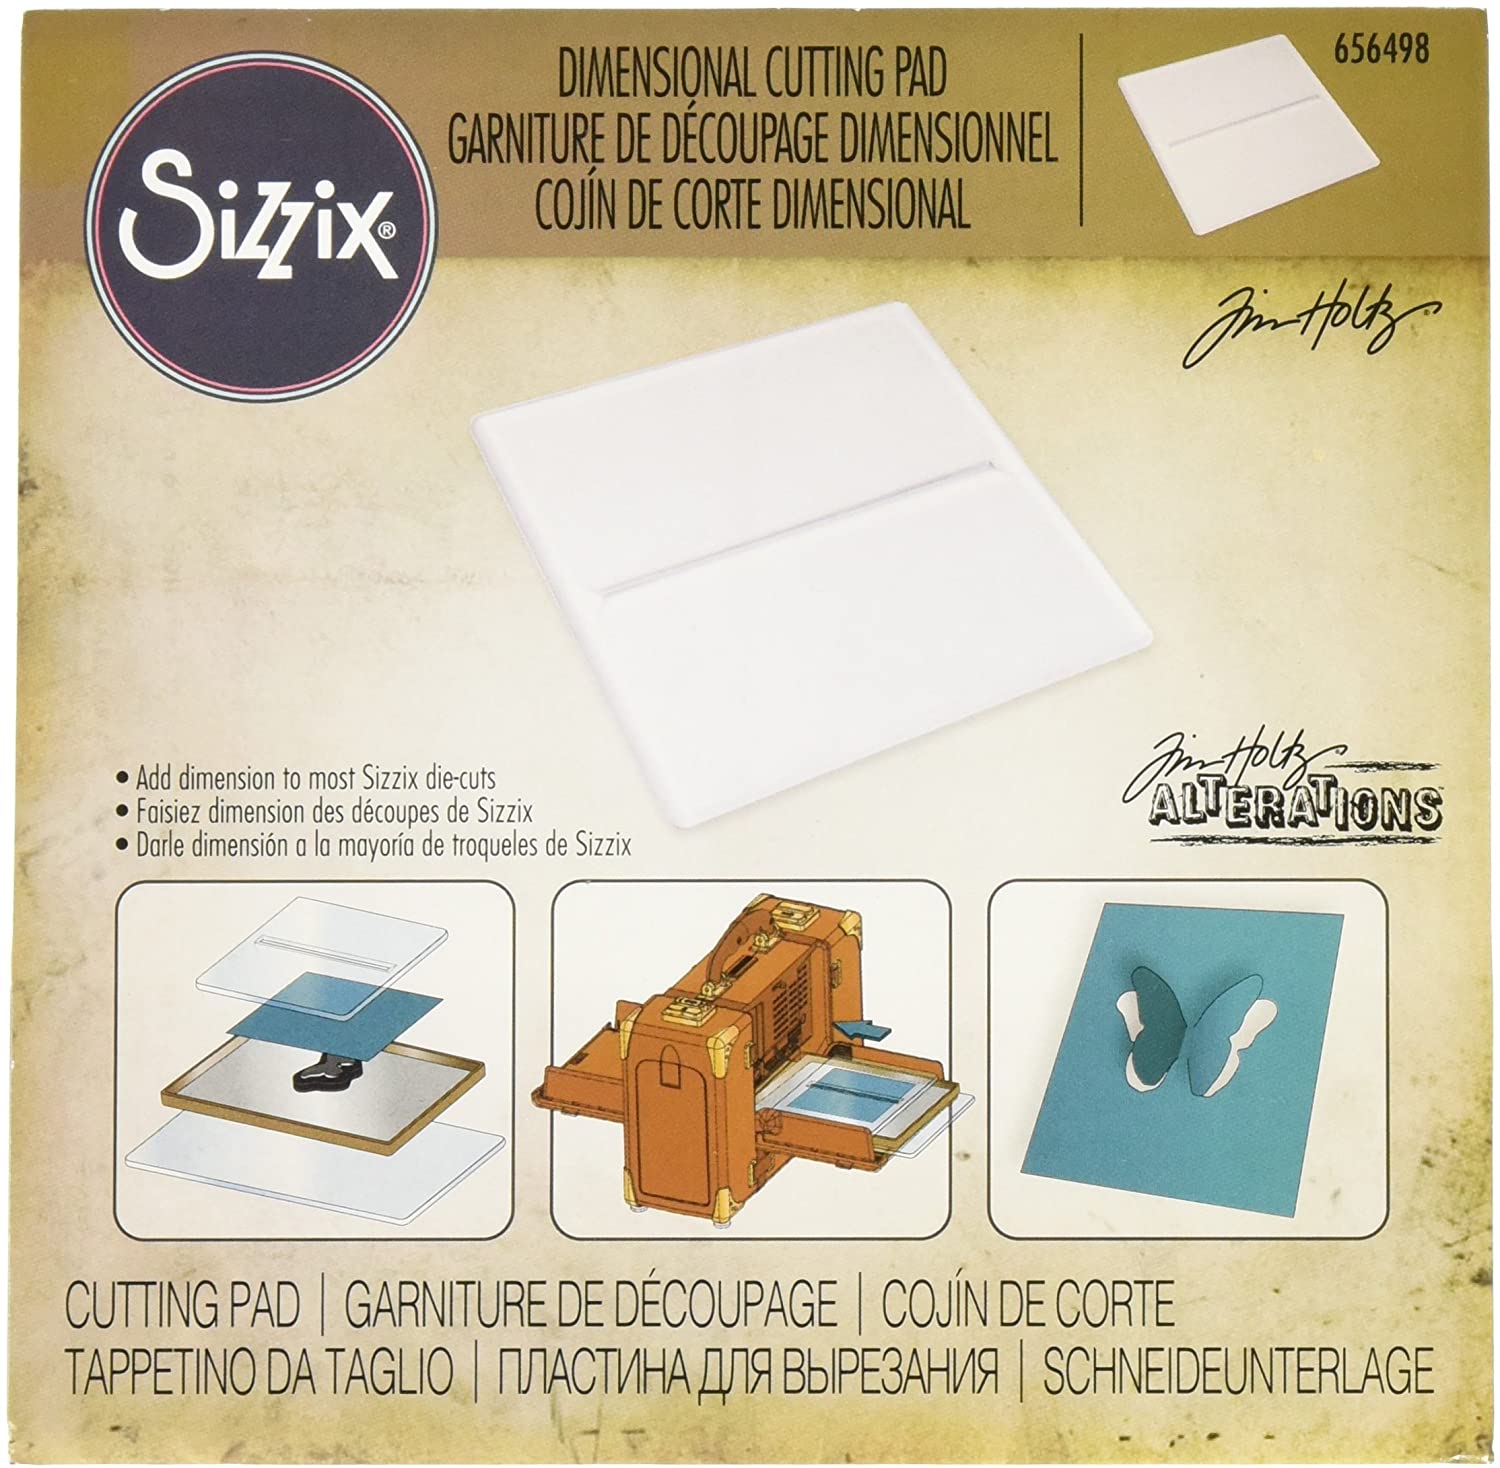 Sizzix - Dimensional Cutting Pad Inspired by Tim Holtz.